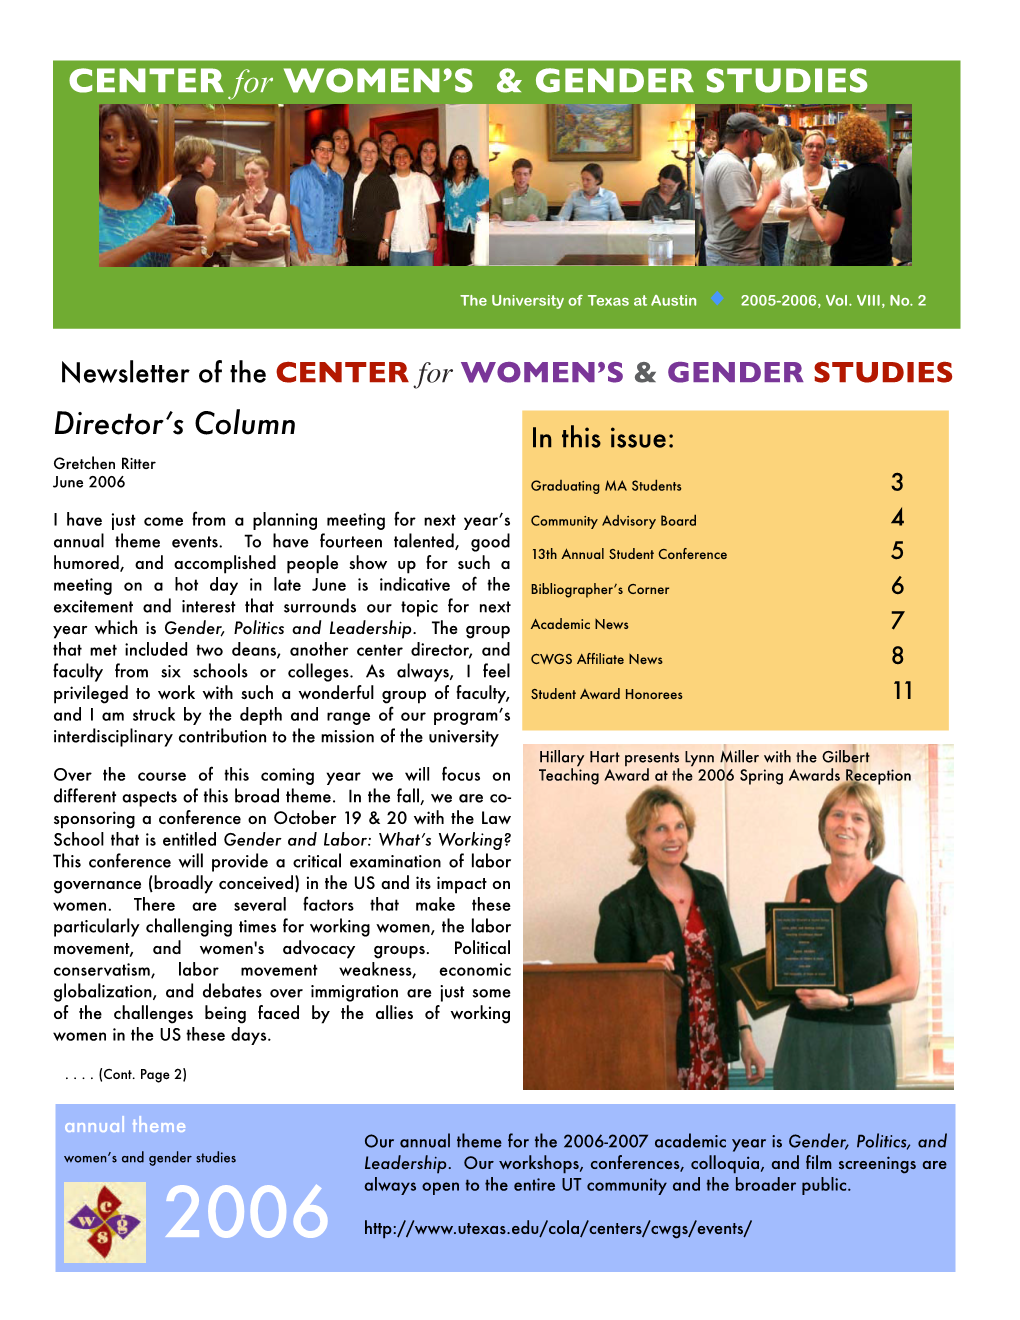 Download the Spring 2006 CWGS Newsletter (PDF